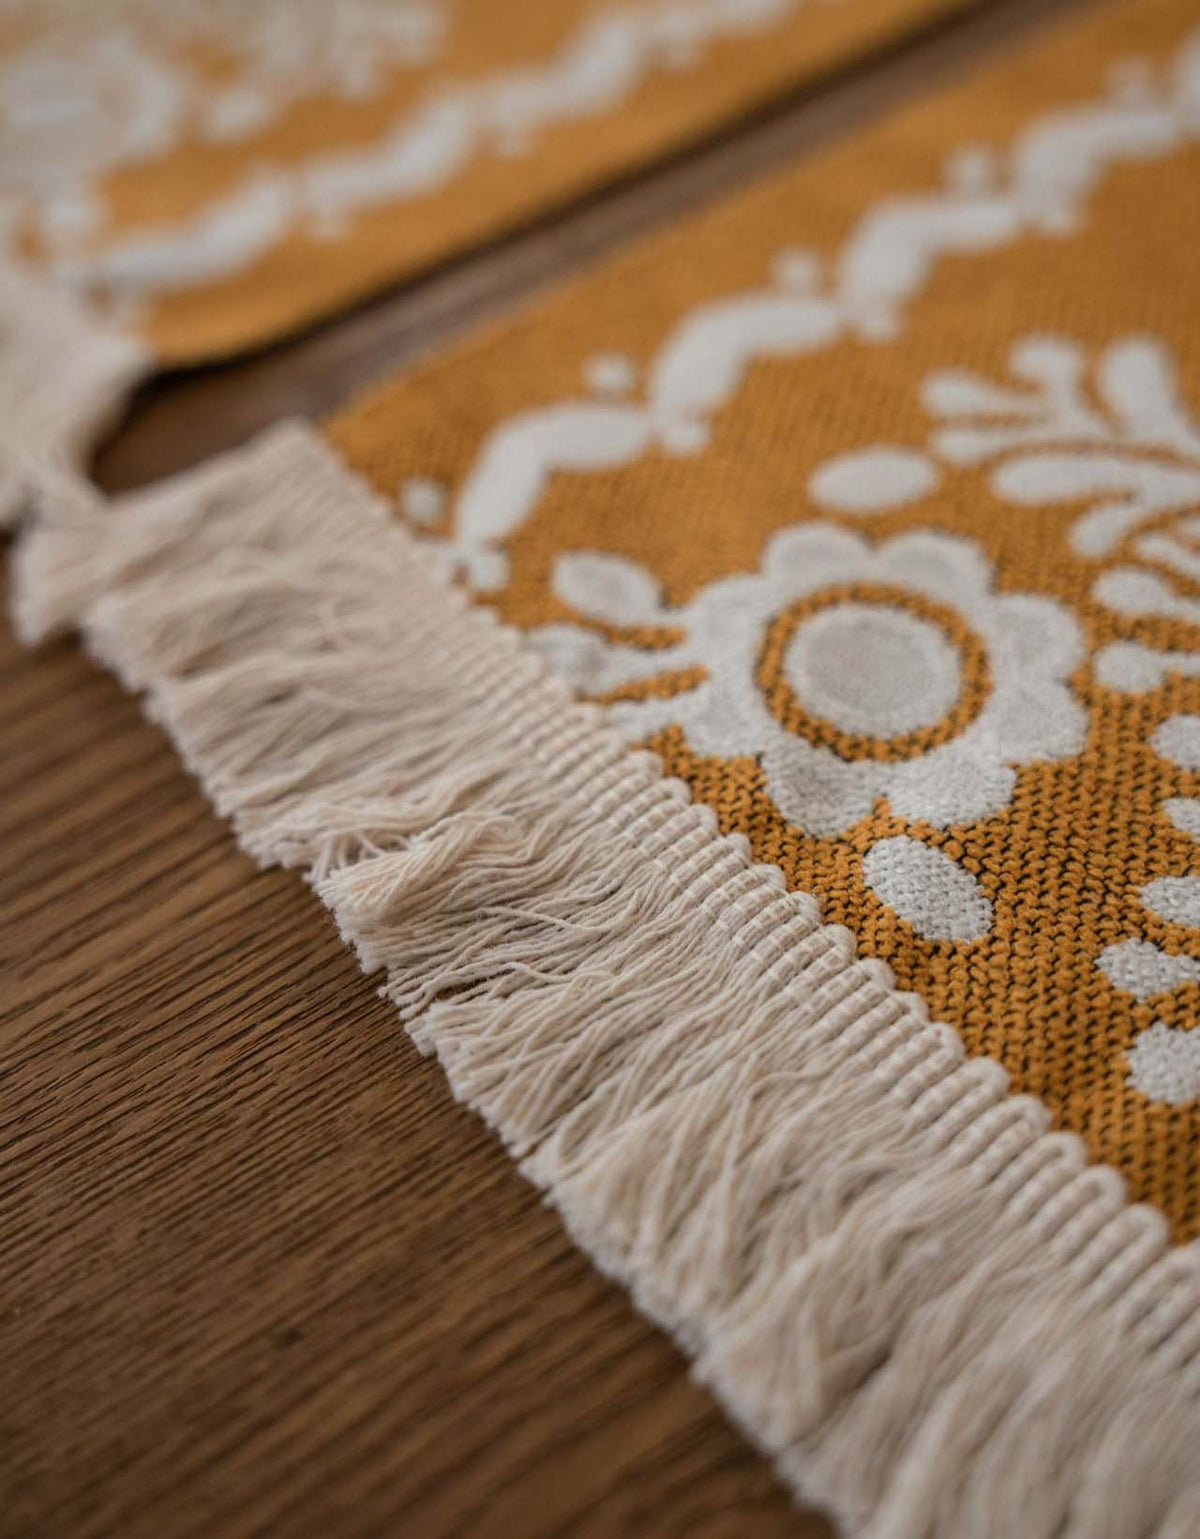 Vintage Jacquard Yellow Table Runner | Placemats